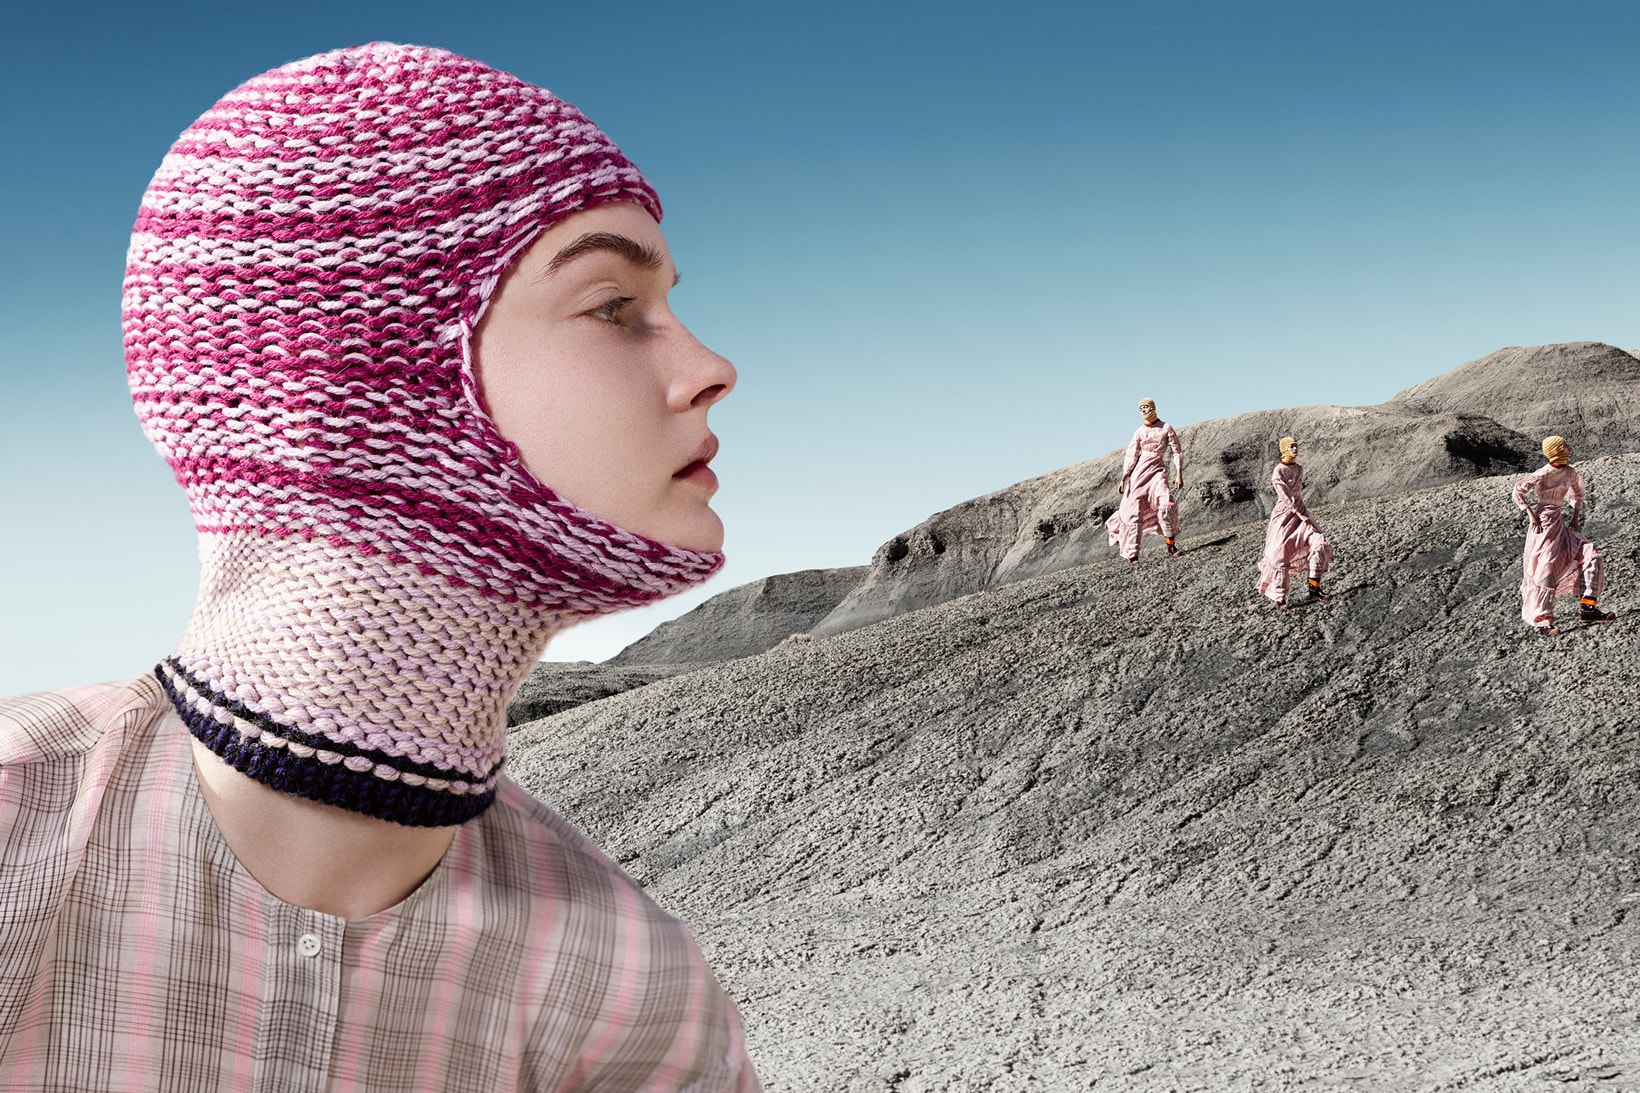 CALVIN KLEIN 205W39NYC Fall 2018 Campaign Knit Mask Sweater Pink